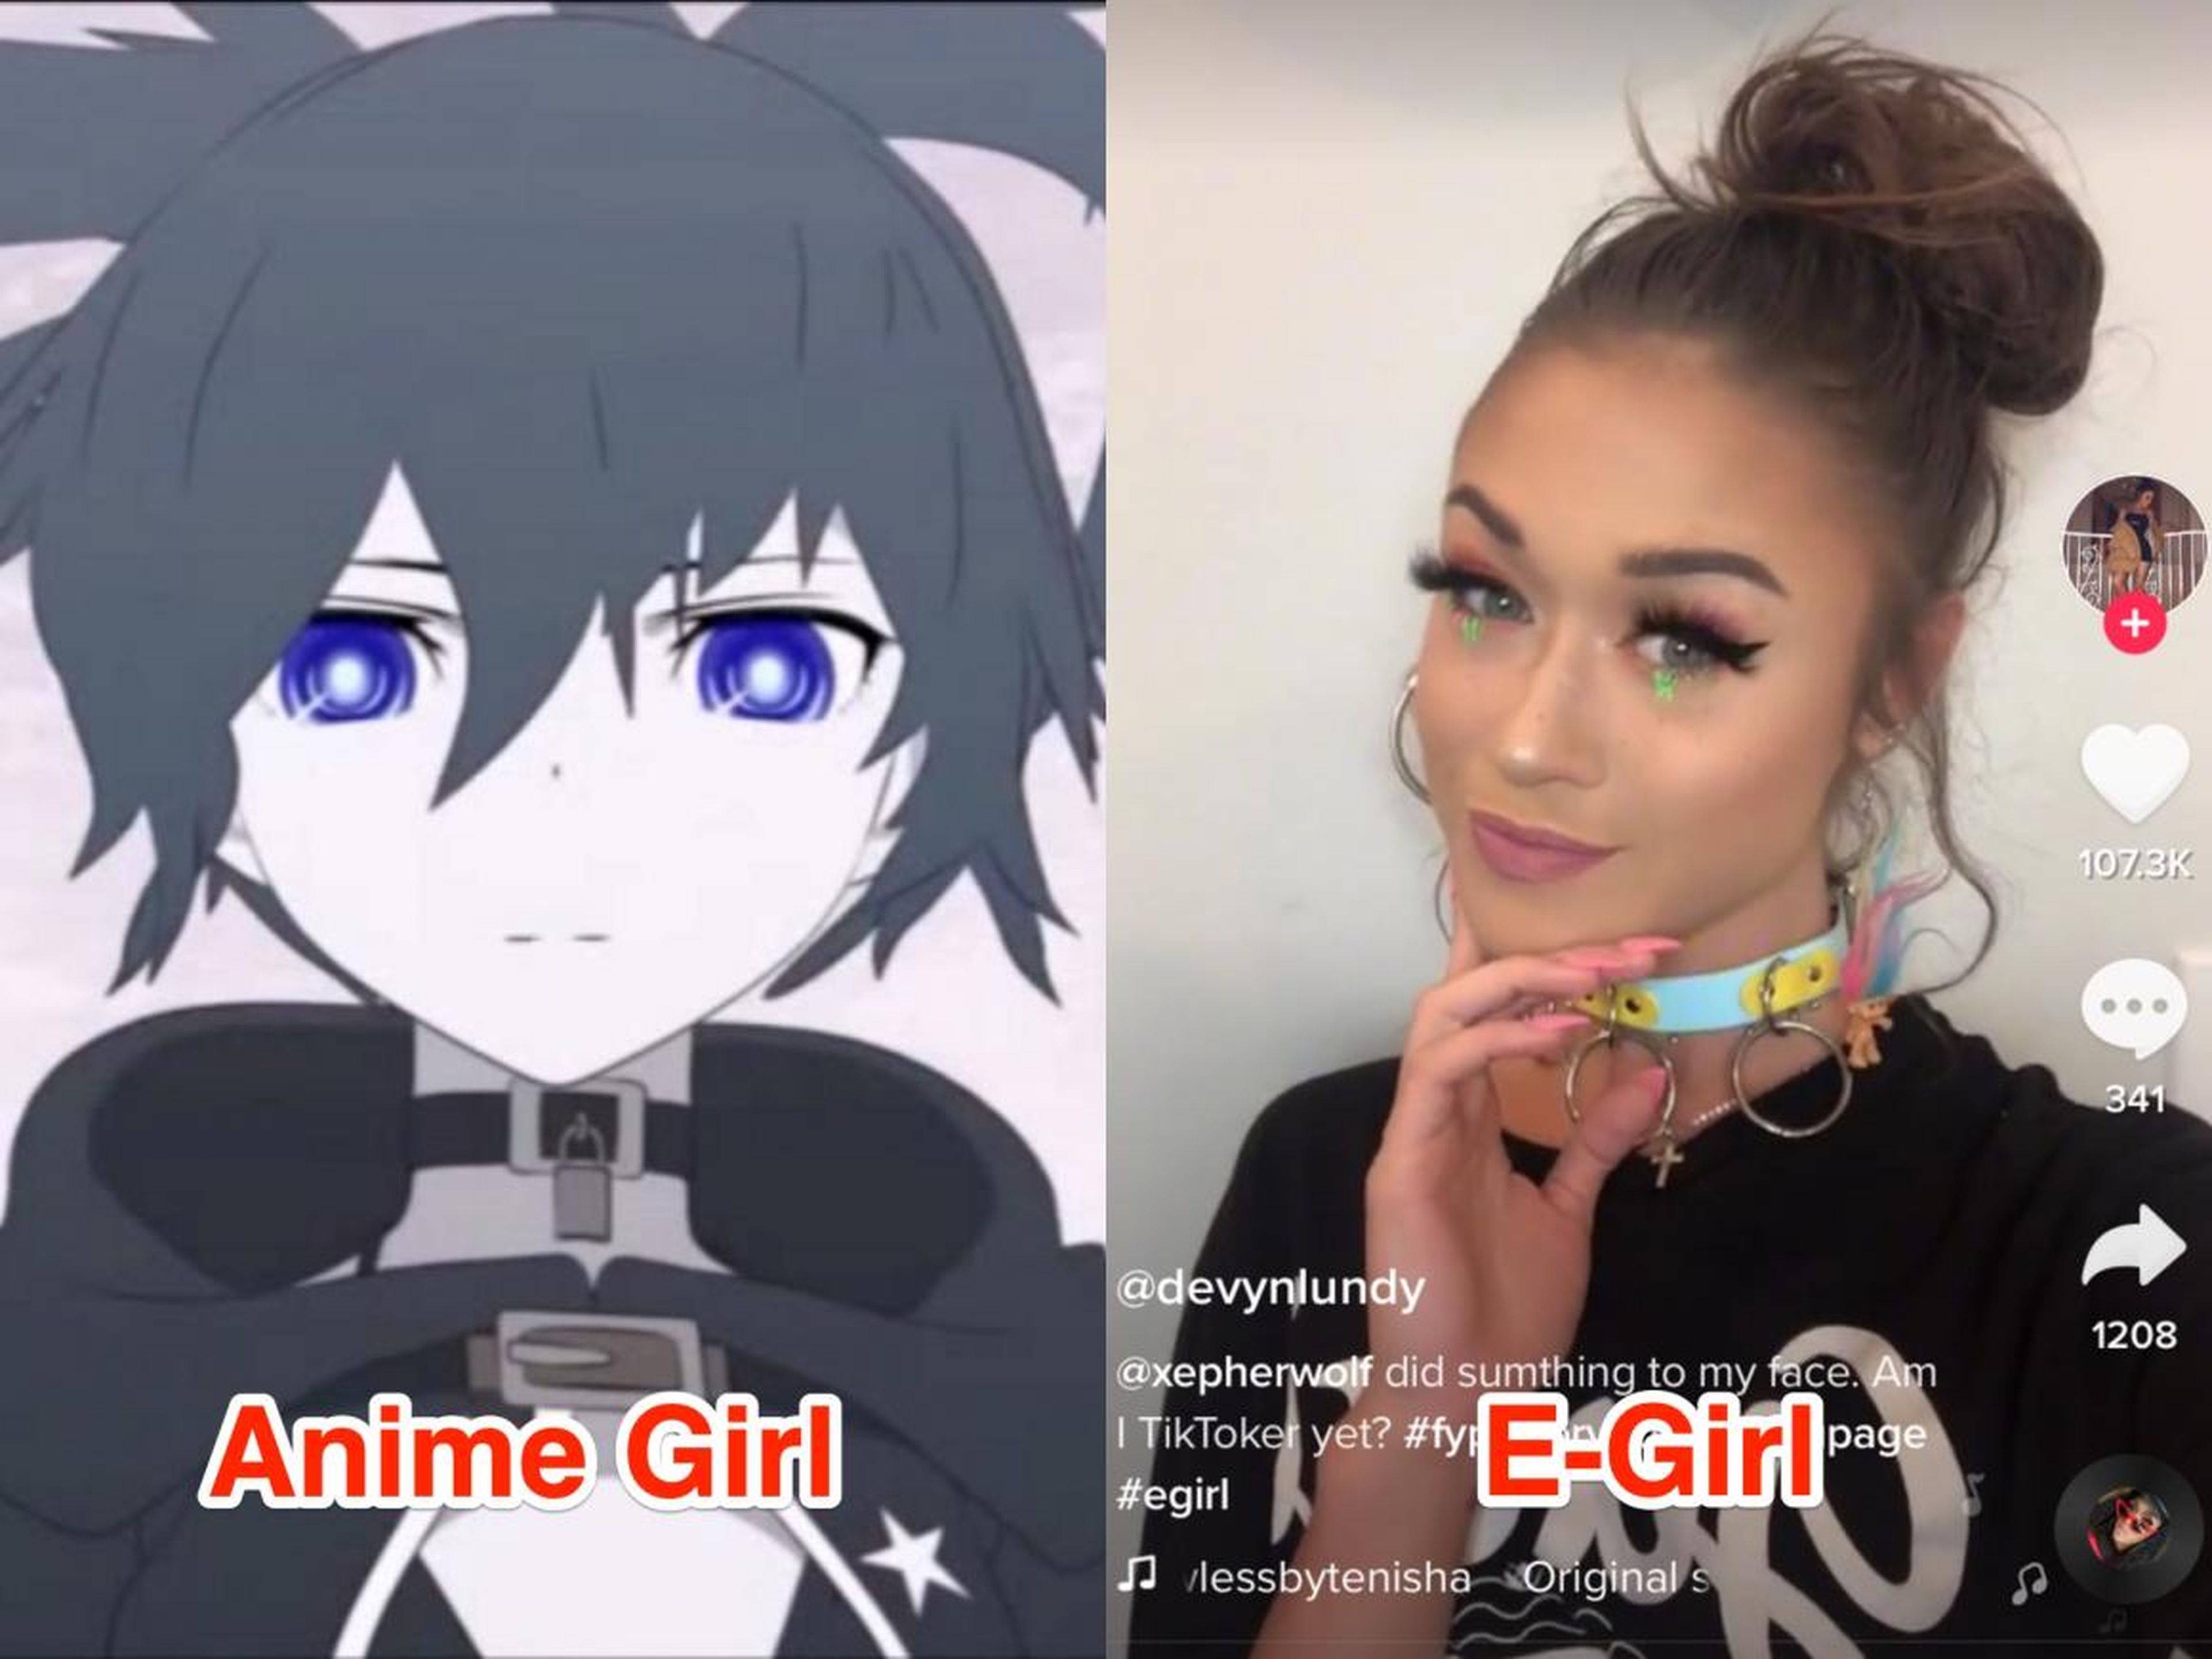 The e-girl aesthetic draws from characteristics of anime, where female characters are often skimpily dressed and fetishized as innocent, helpless victims. One TikToker referred to this as the "I'm Baby" quality in a story for Vox.